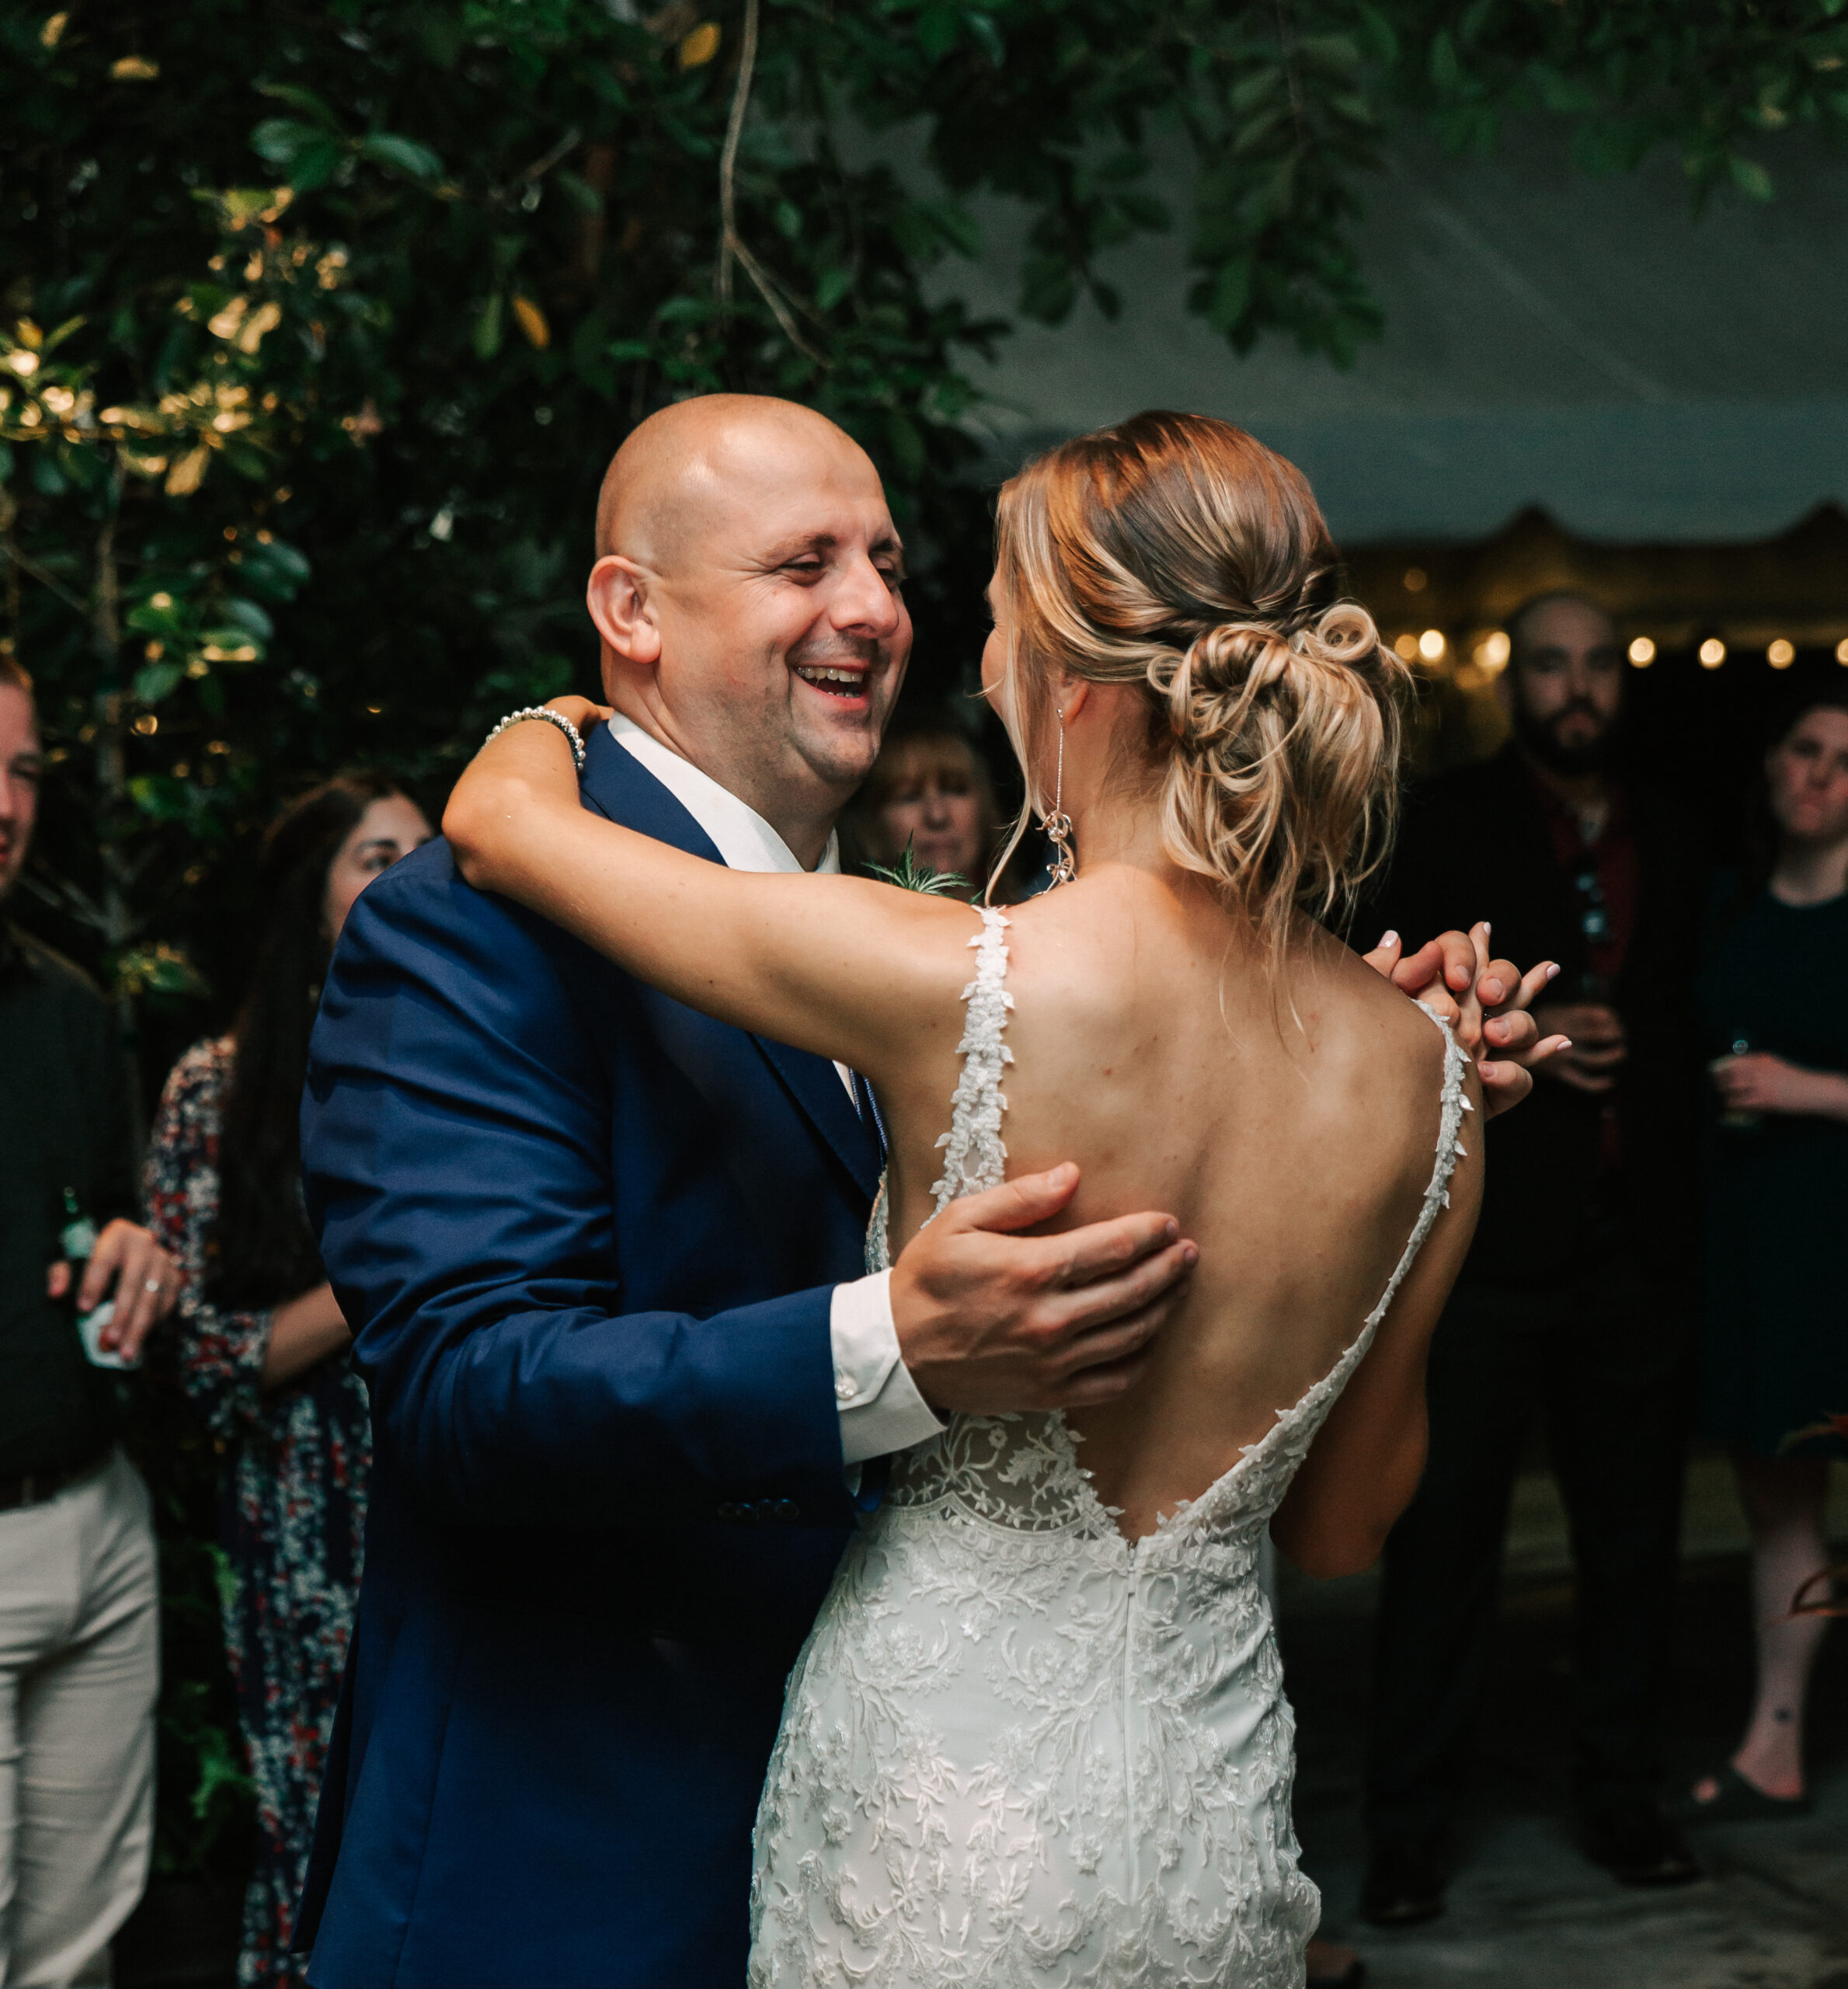 bride and groom sharing their first dance at their wedding at the Roger Williams Botanical Garden